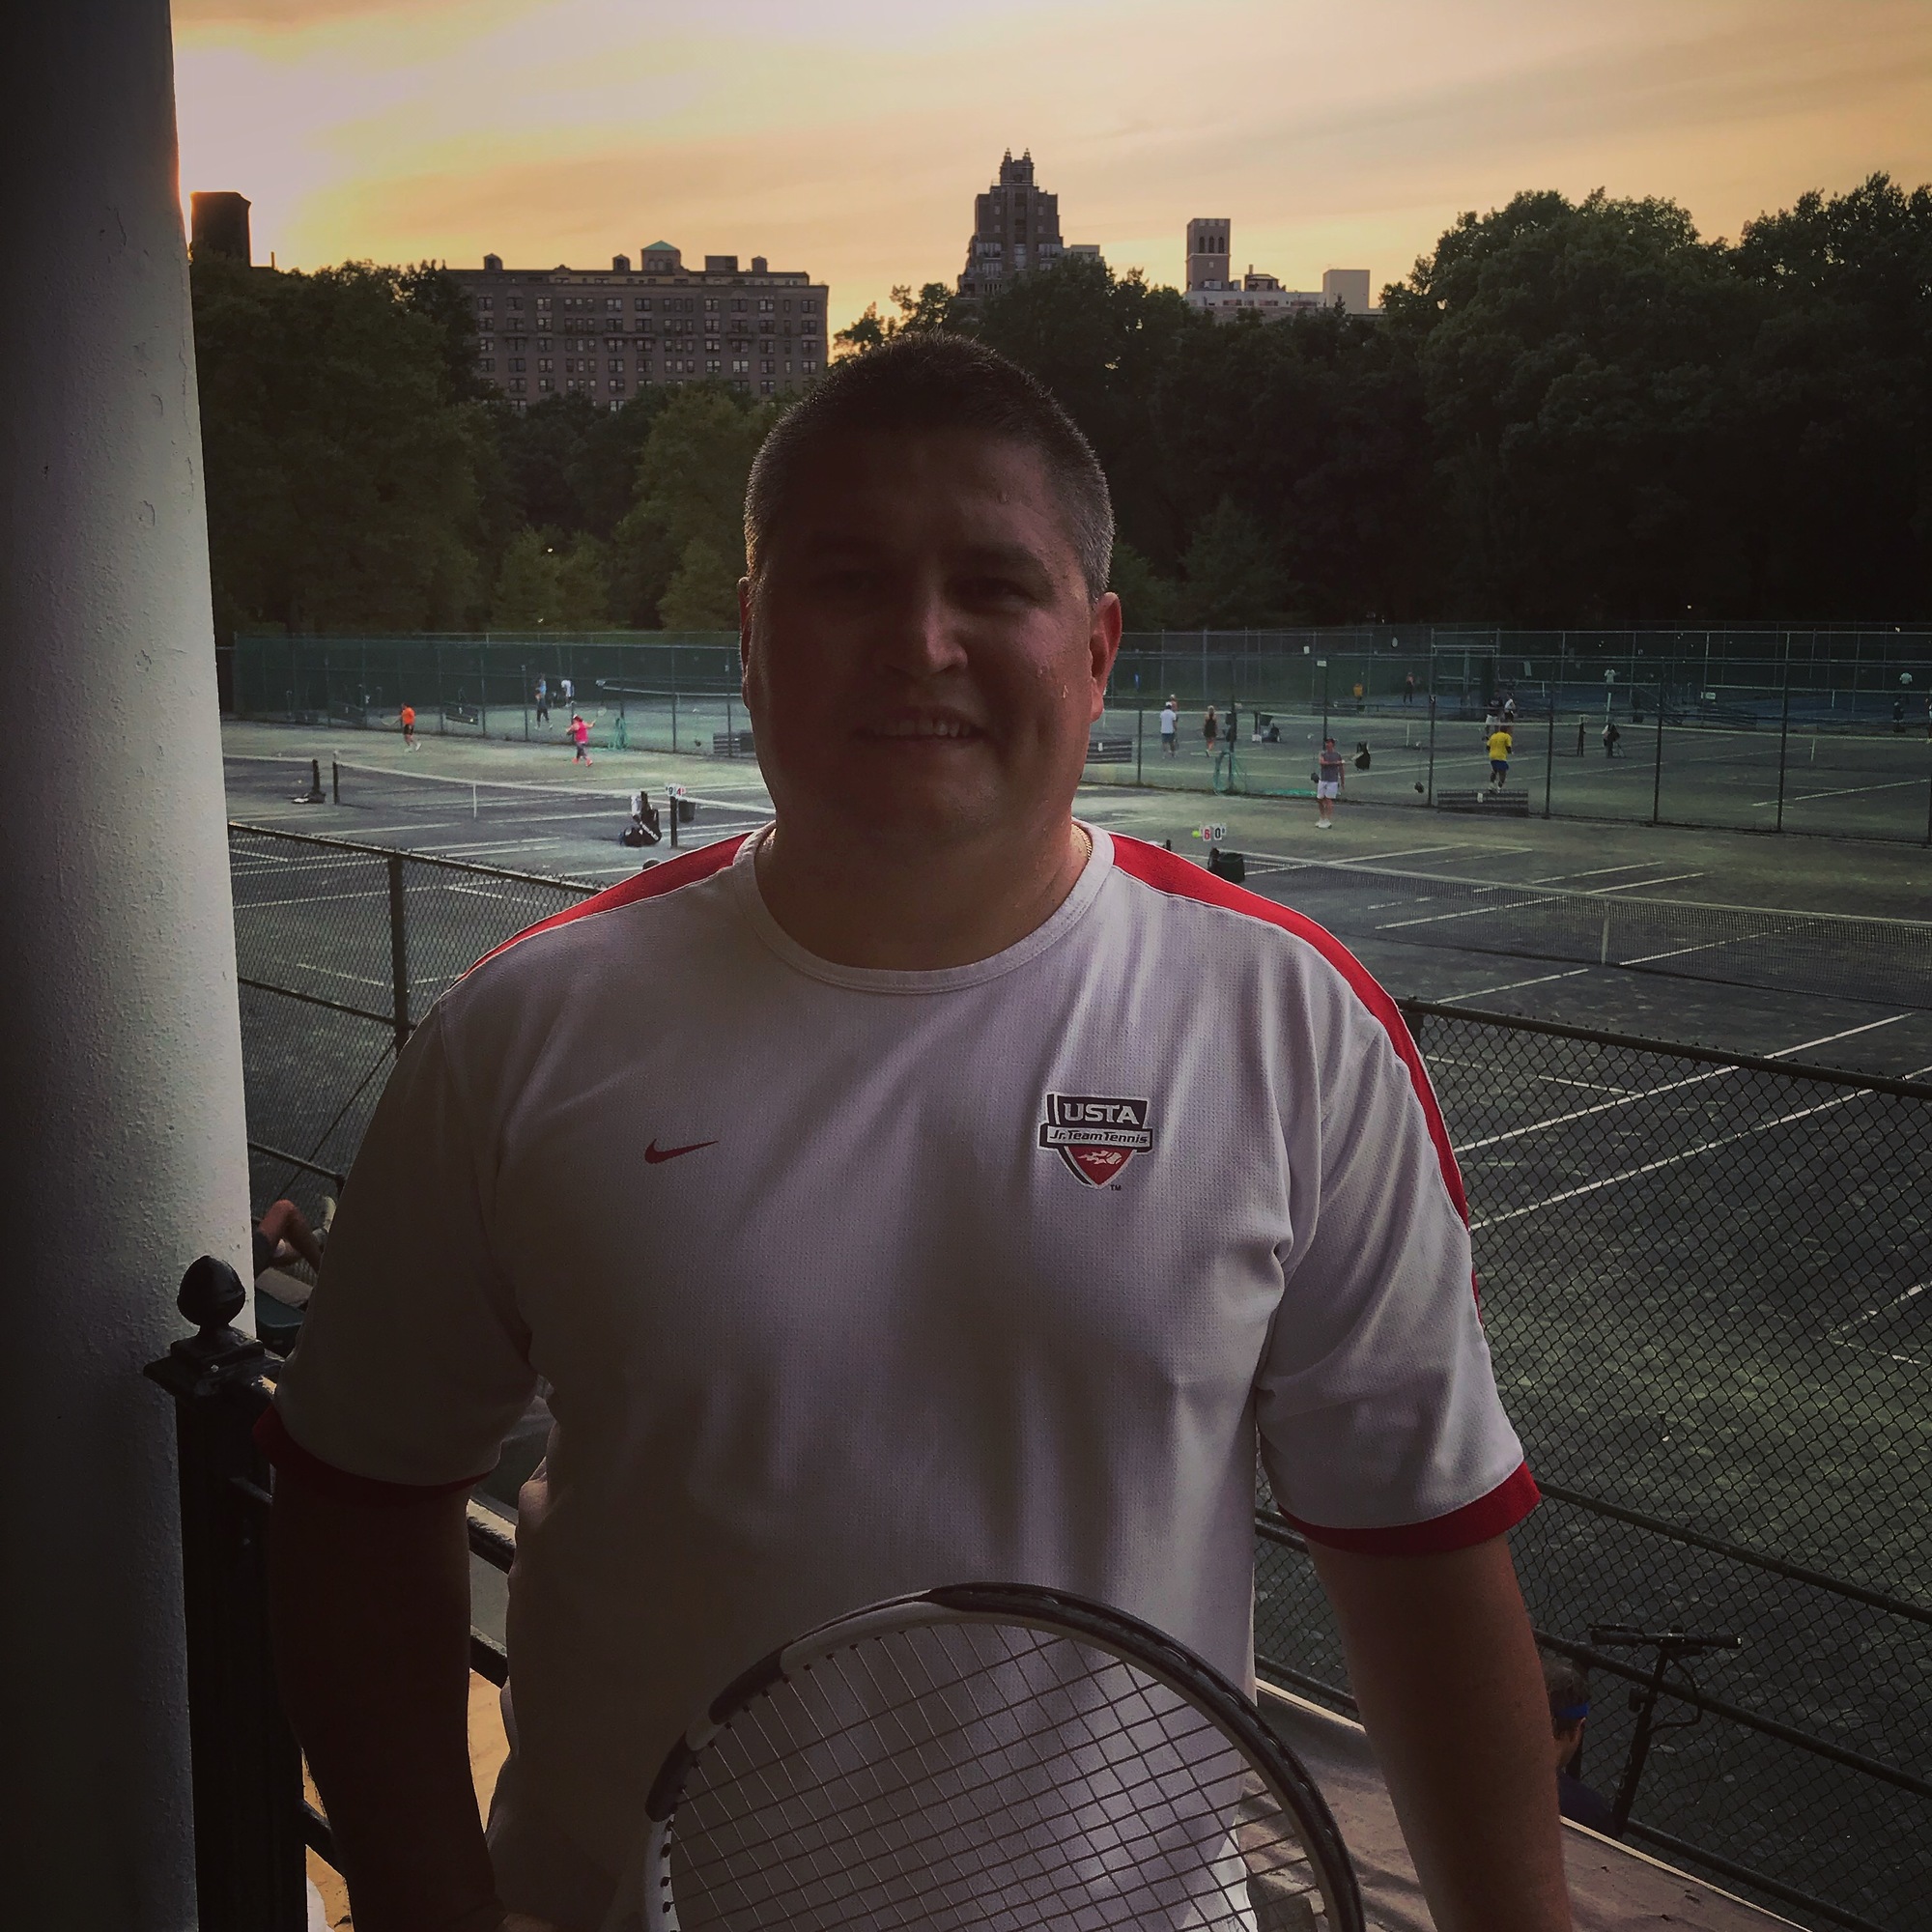 Alexander P. teaches tennis lessons in Brooklyn, NY